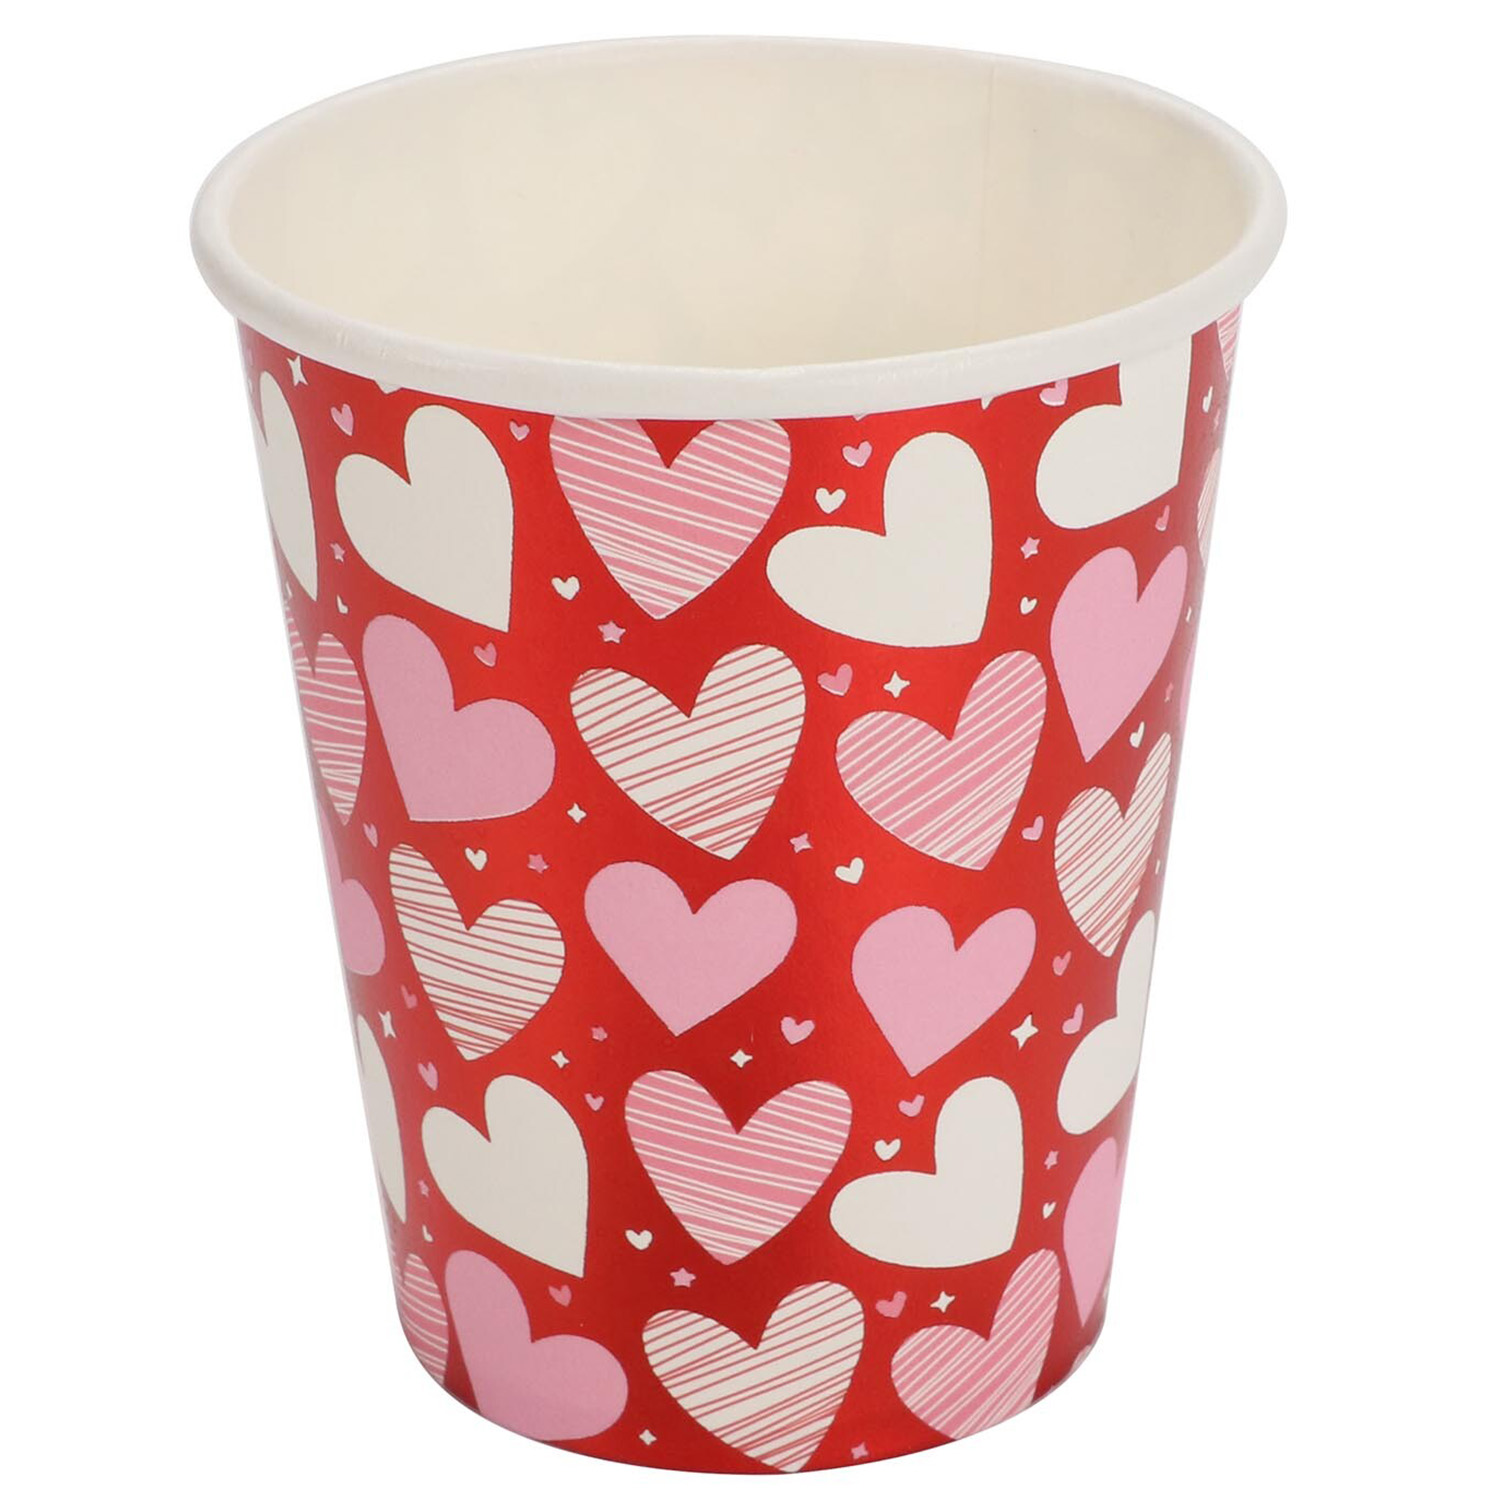 Pack of 8 Heart Paper Cups - Red Image 1